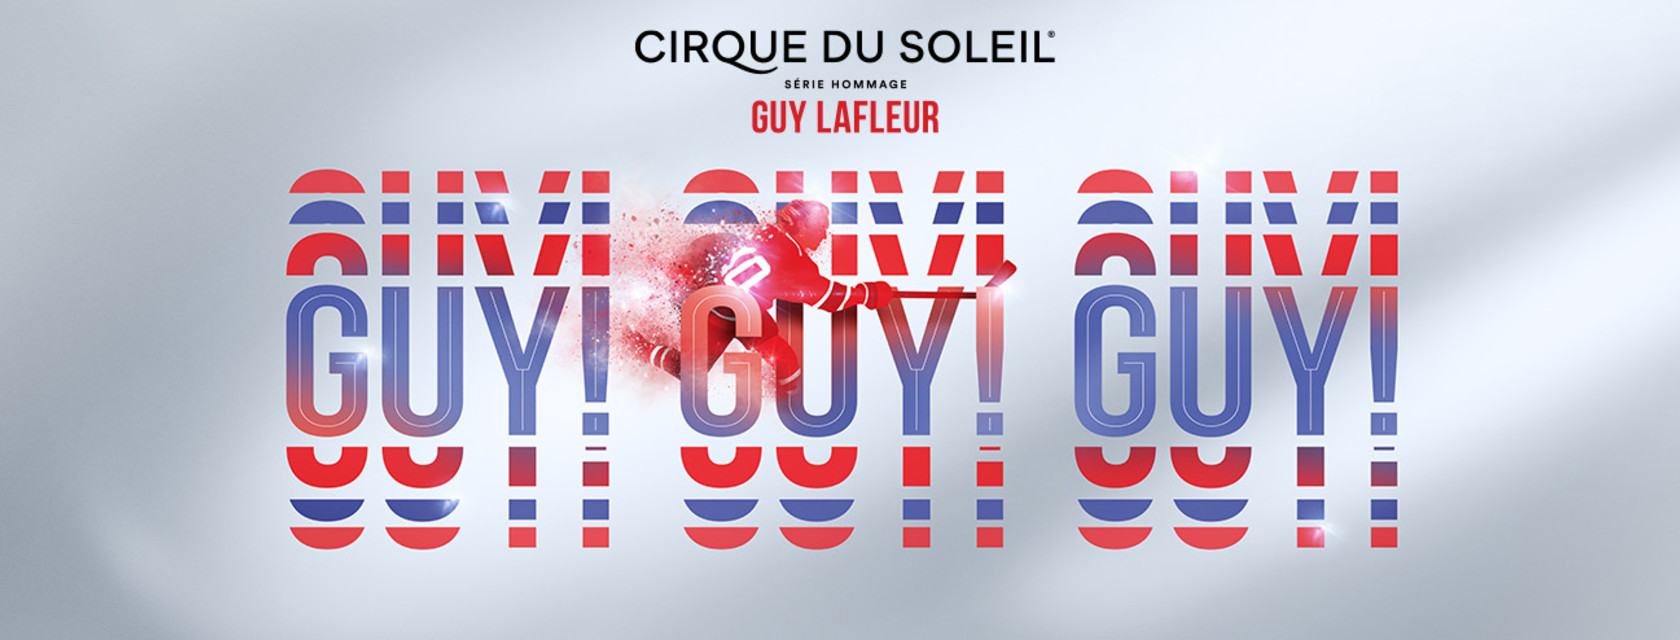 SEVENTH EDITION OF THE CIRQUE DU SOLEIL TRIBUTE SERIES GUY! GUY! GUY!